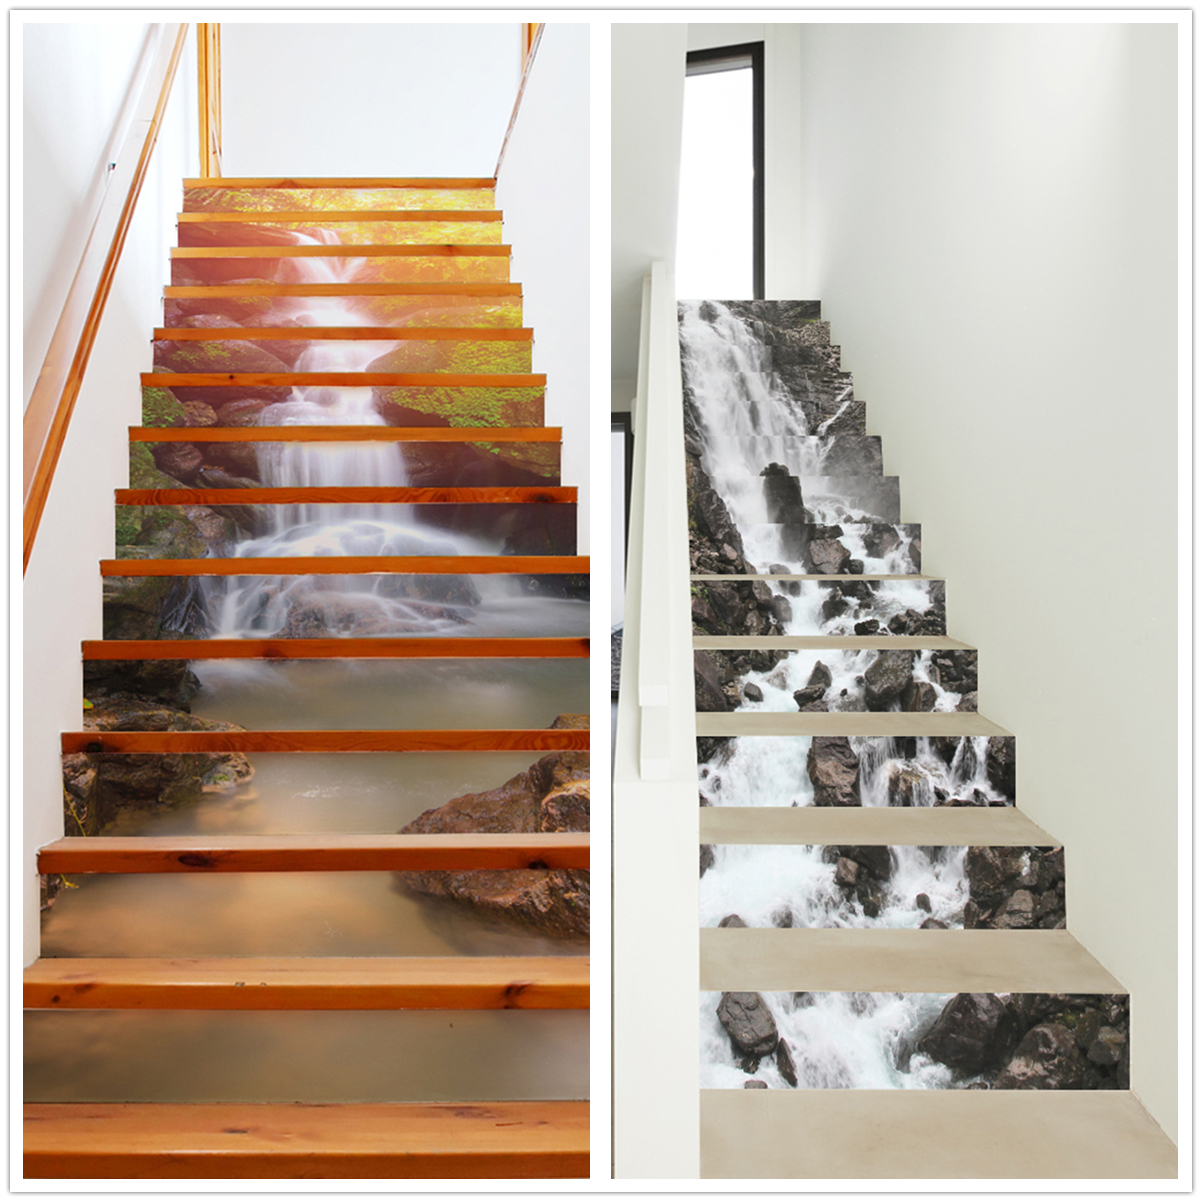 6//13Pcs 3D Self-Adhesive Staircase Stickers Party Home Decor Stair Riser Decals